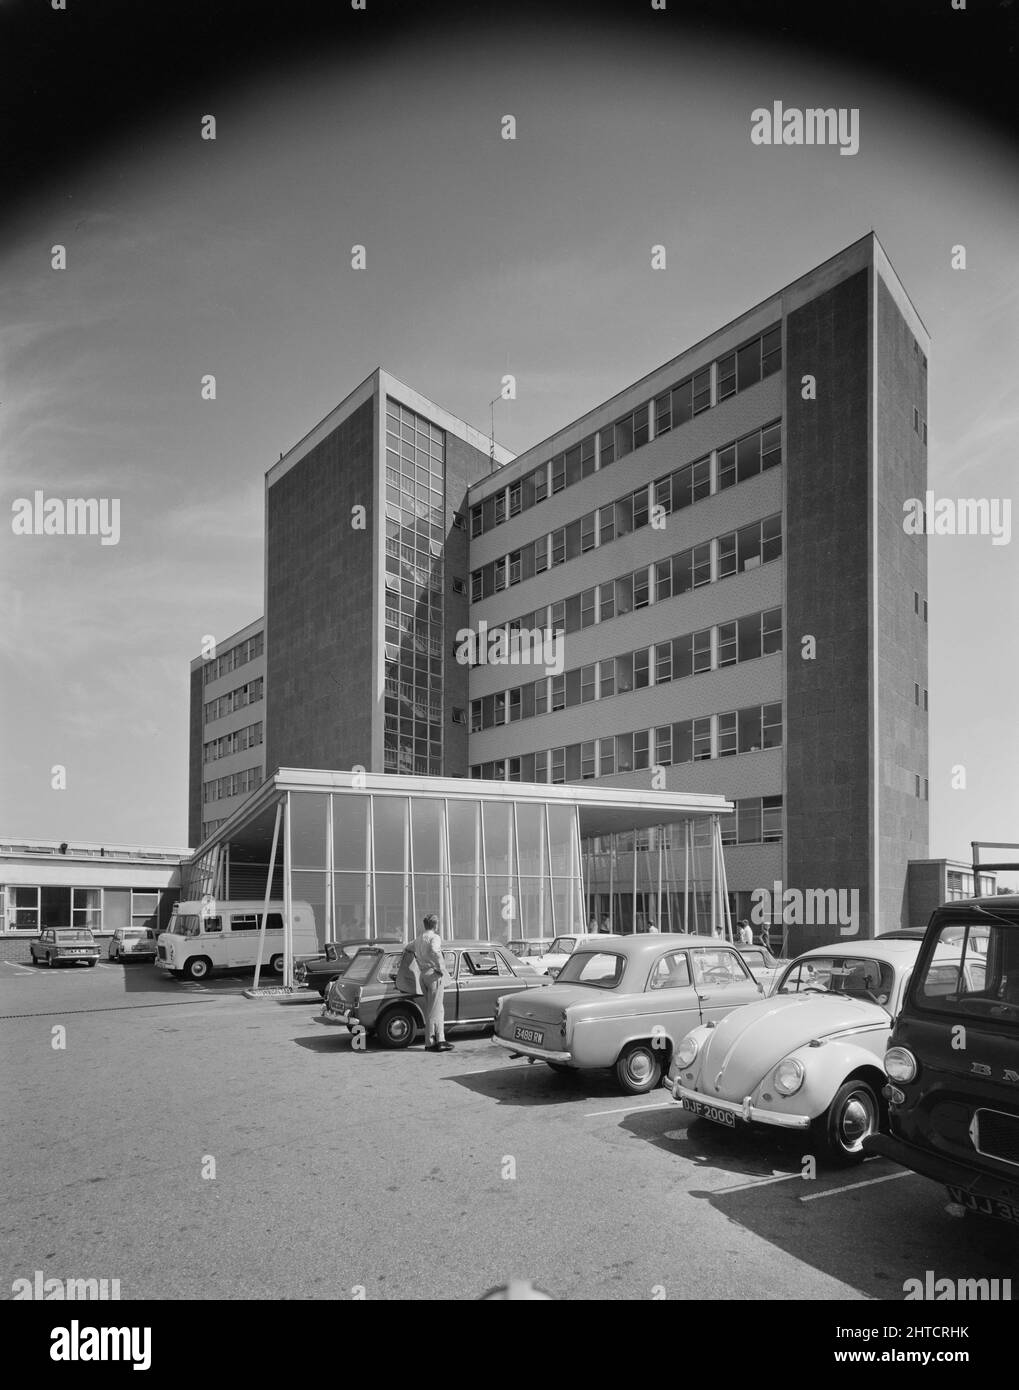 Walsgrave Hospital, Clifford Bridge Road, Walsgrave on Sowe, Coventry, West Midlands, 01/07/1969. The exterior of the Maternity Block at the Walsgrave Hospital, Coventry, showing the main entrance and ambulance canopy. This photograph appears in the October 1969 issue of Team Spirit, the Laing company newsletter. Stock Photo